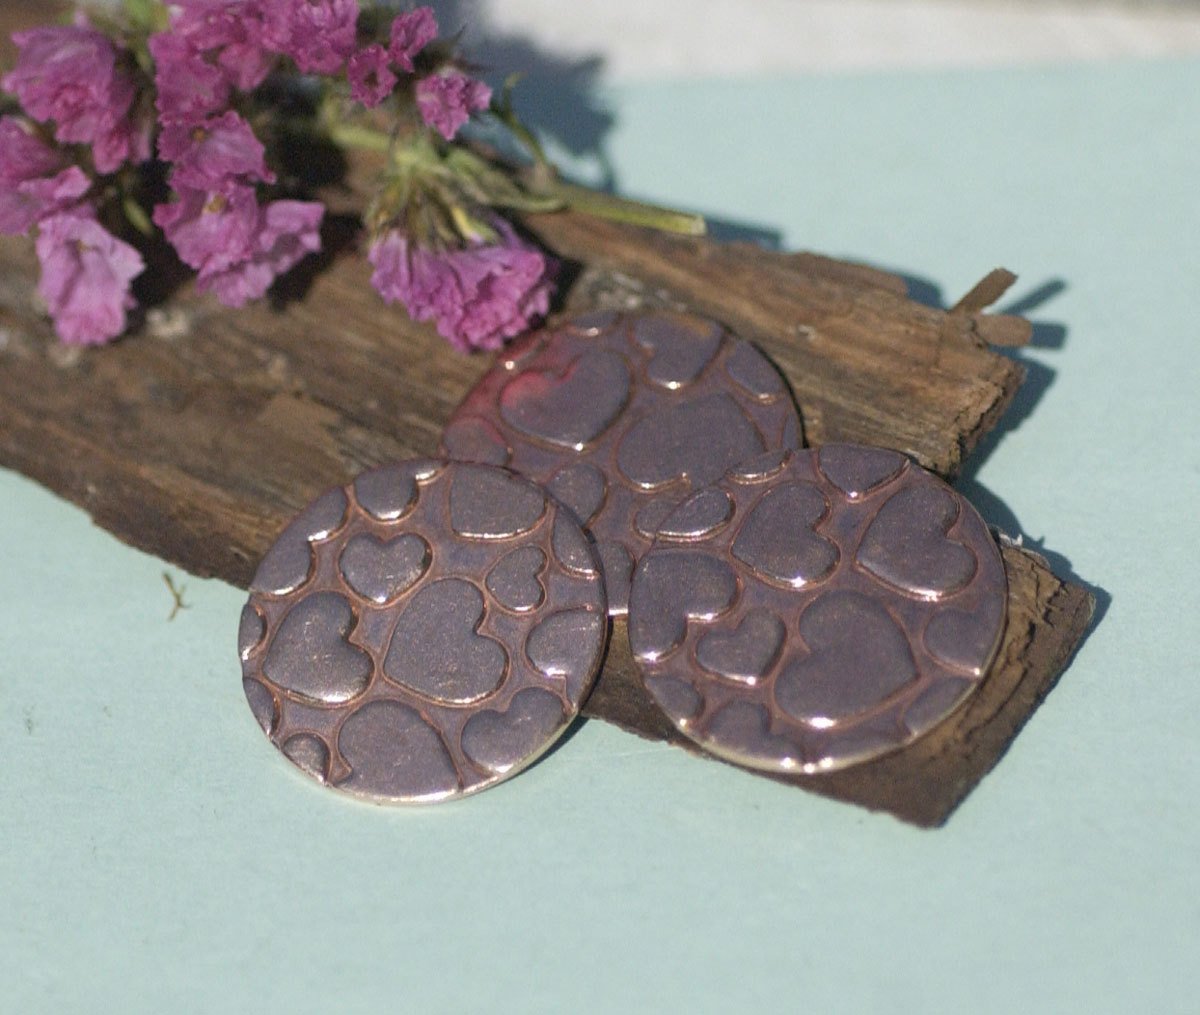 Metal Charm Copper Disc 24G 20mm Enameling Soldering Stamping Blanks - Metalworking Supply - 4 Pieces